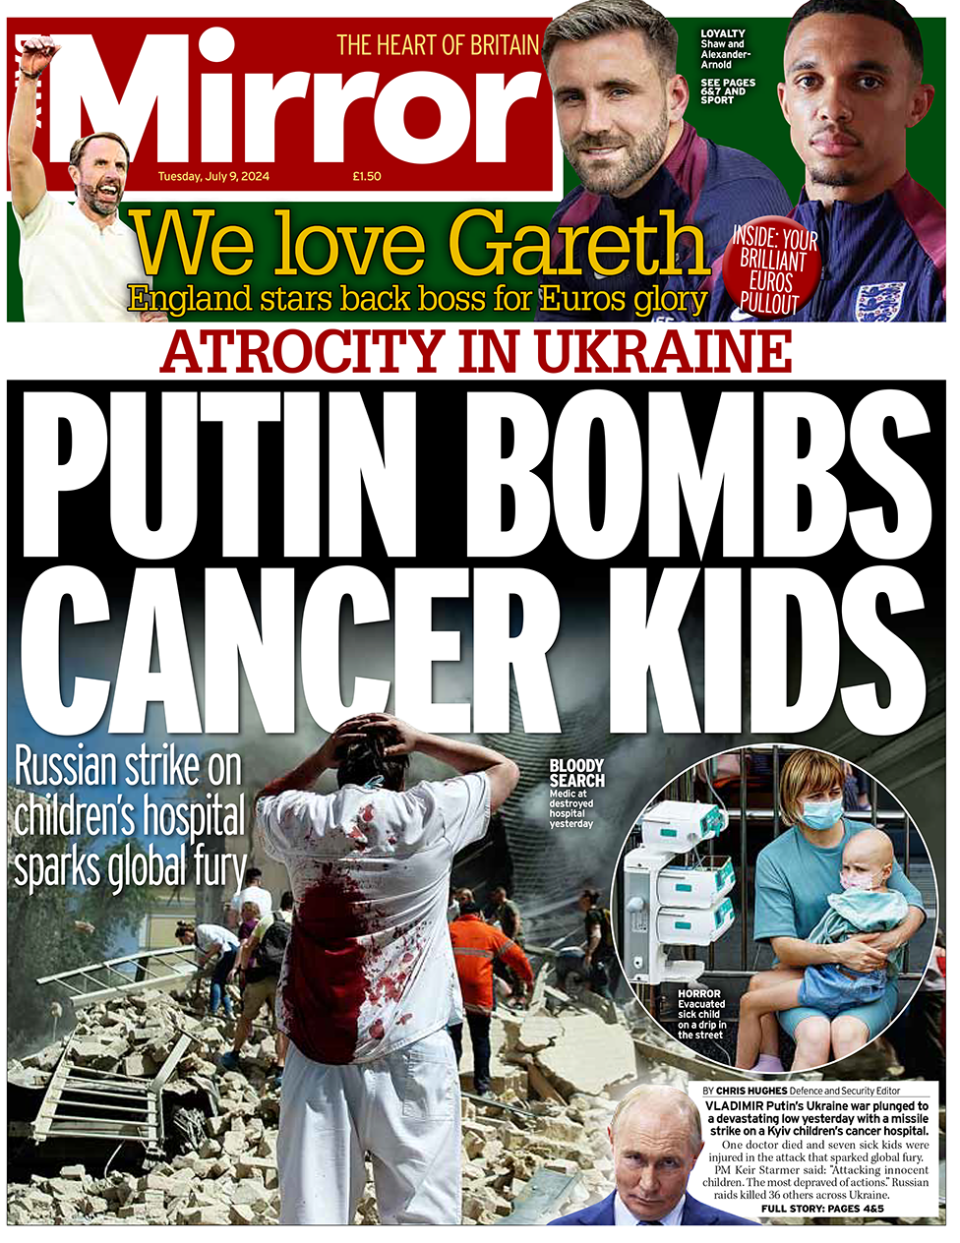 Front page of the Daily Mirror, which focuses on a strike on a children's hospital in Ukraine